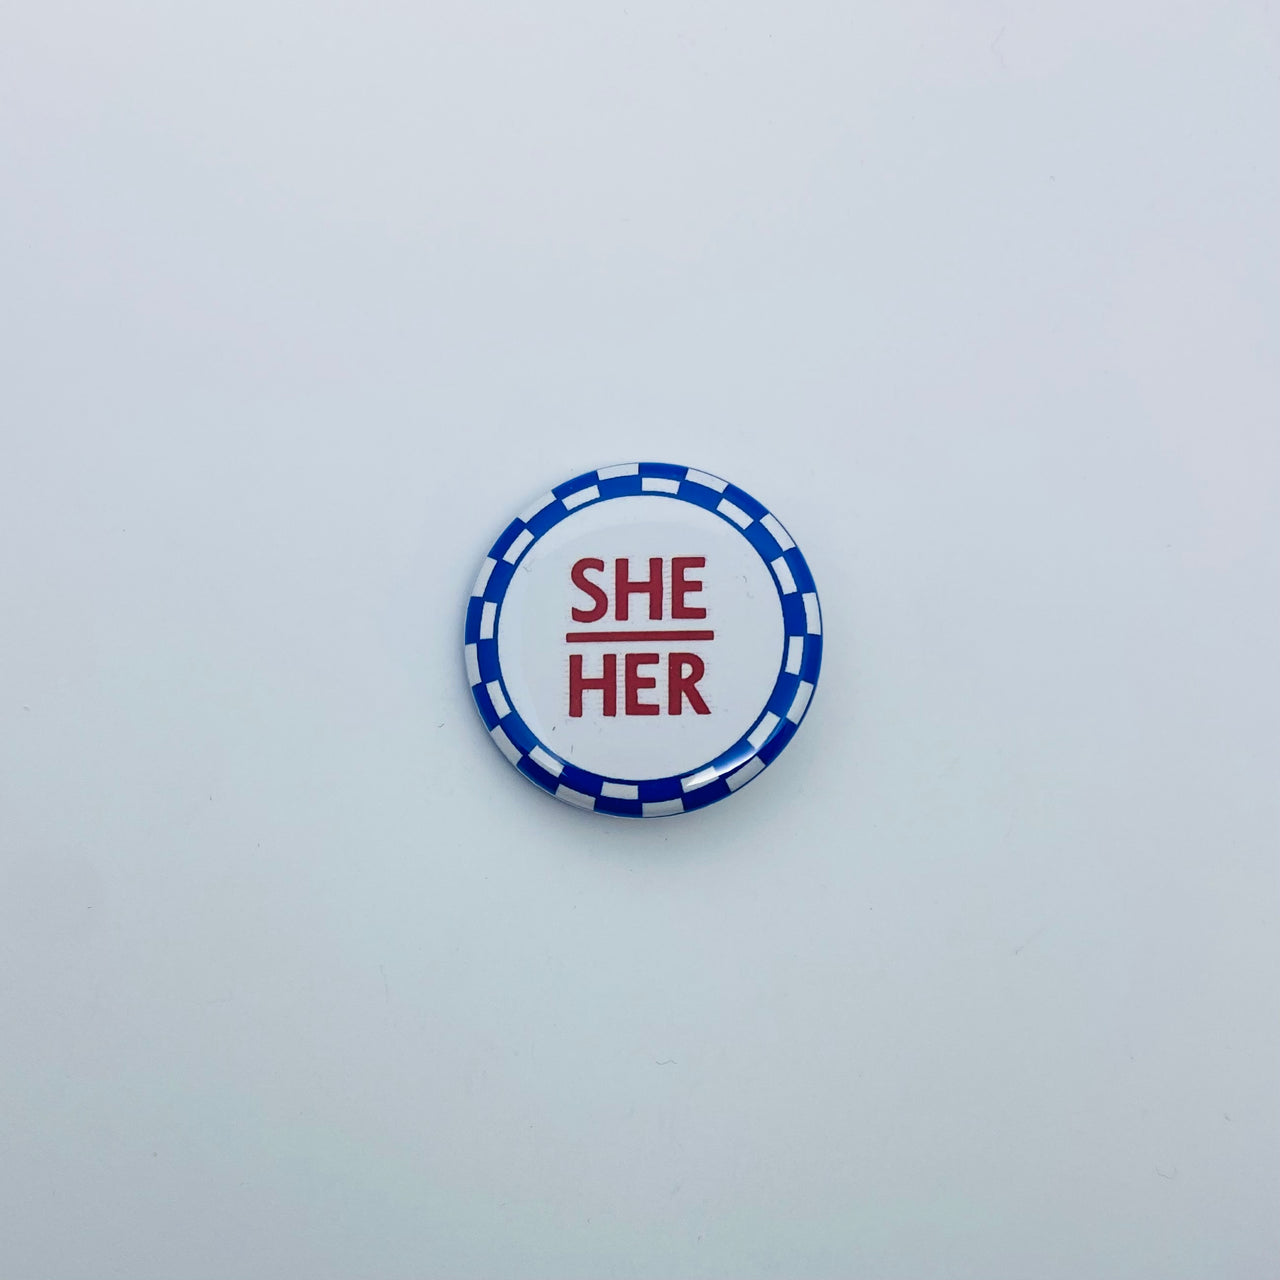 Vintage Quippy Button - SHE/HER